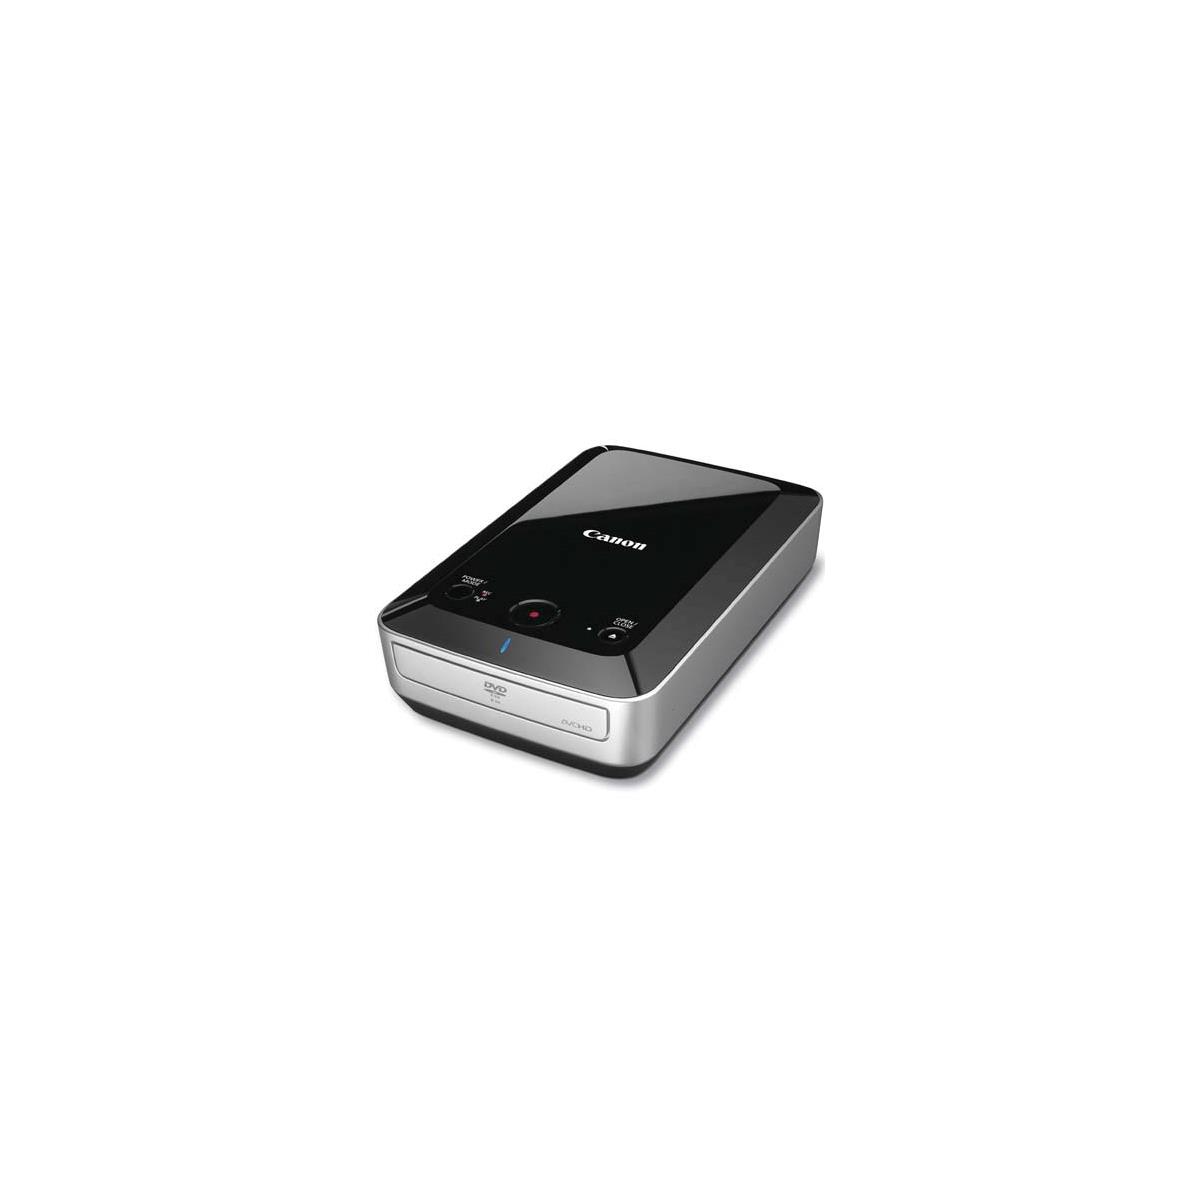 Image of Canon DW-100 DVD Burner with USB 2.0 Hi-Speed